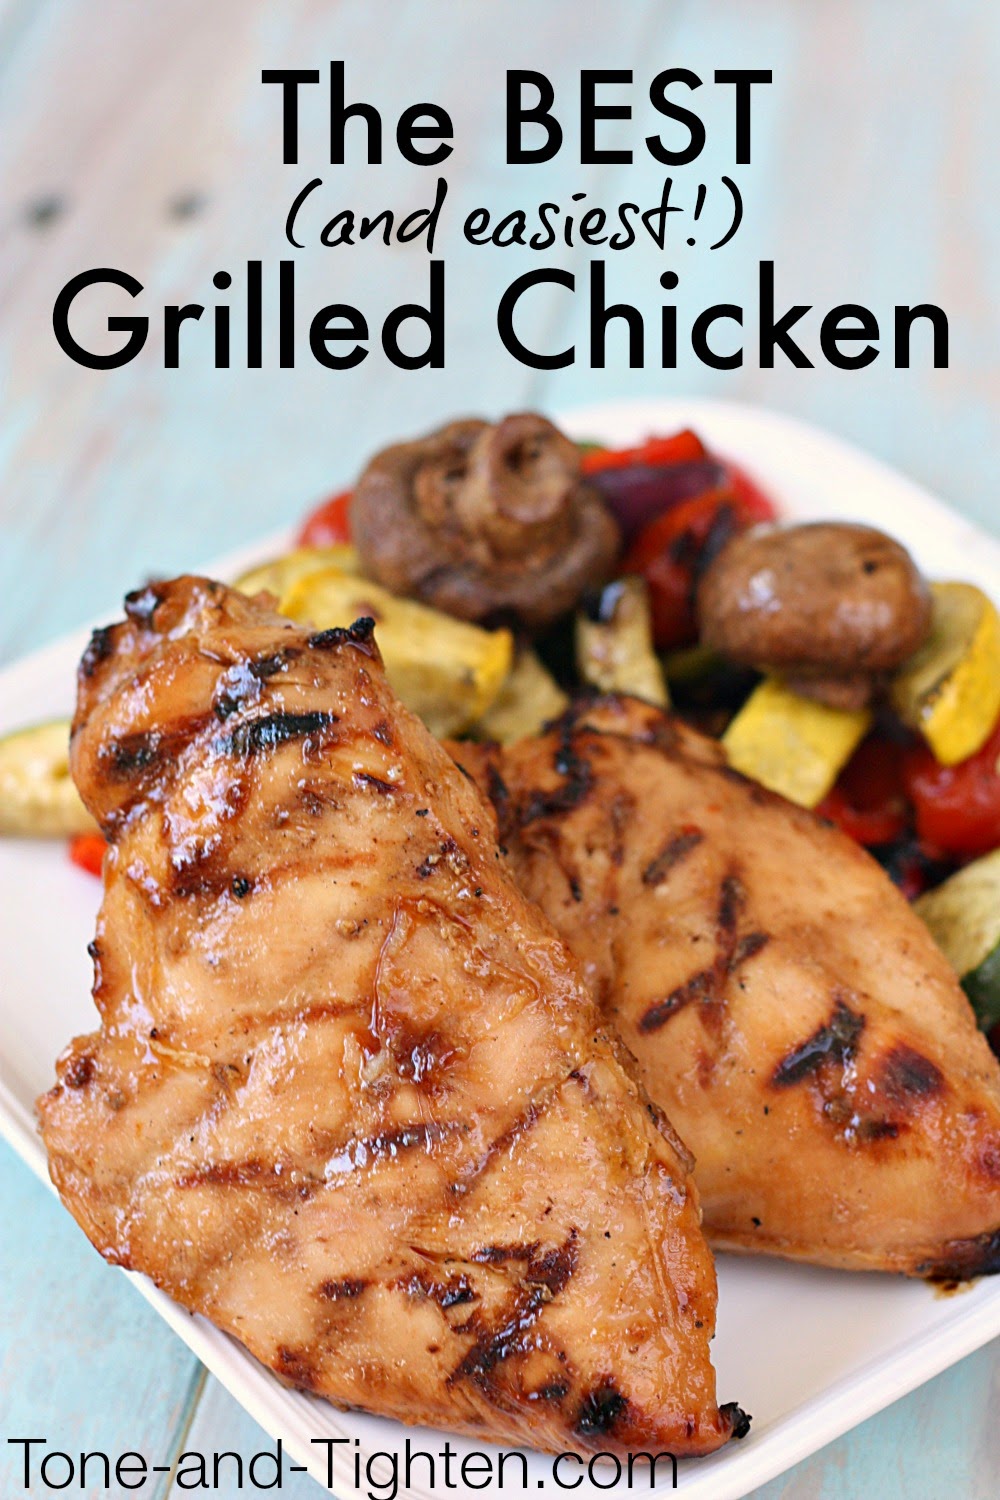 The Best Grilled Chicken Recipe (only 4 ingredients!)